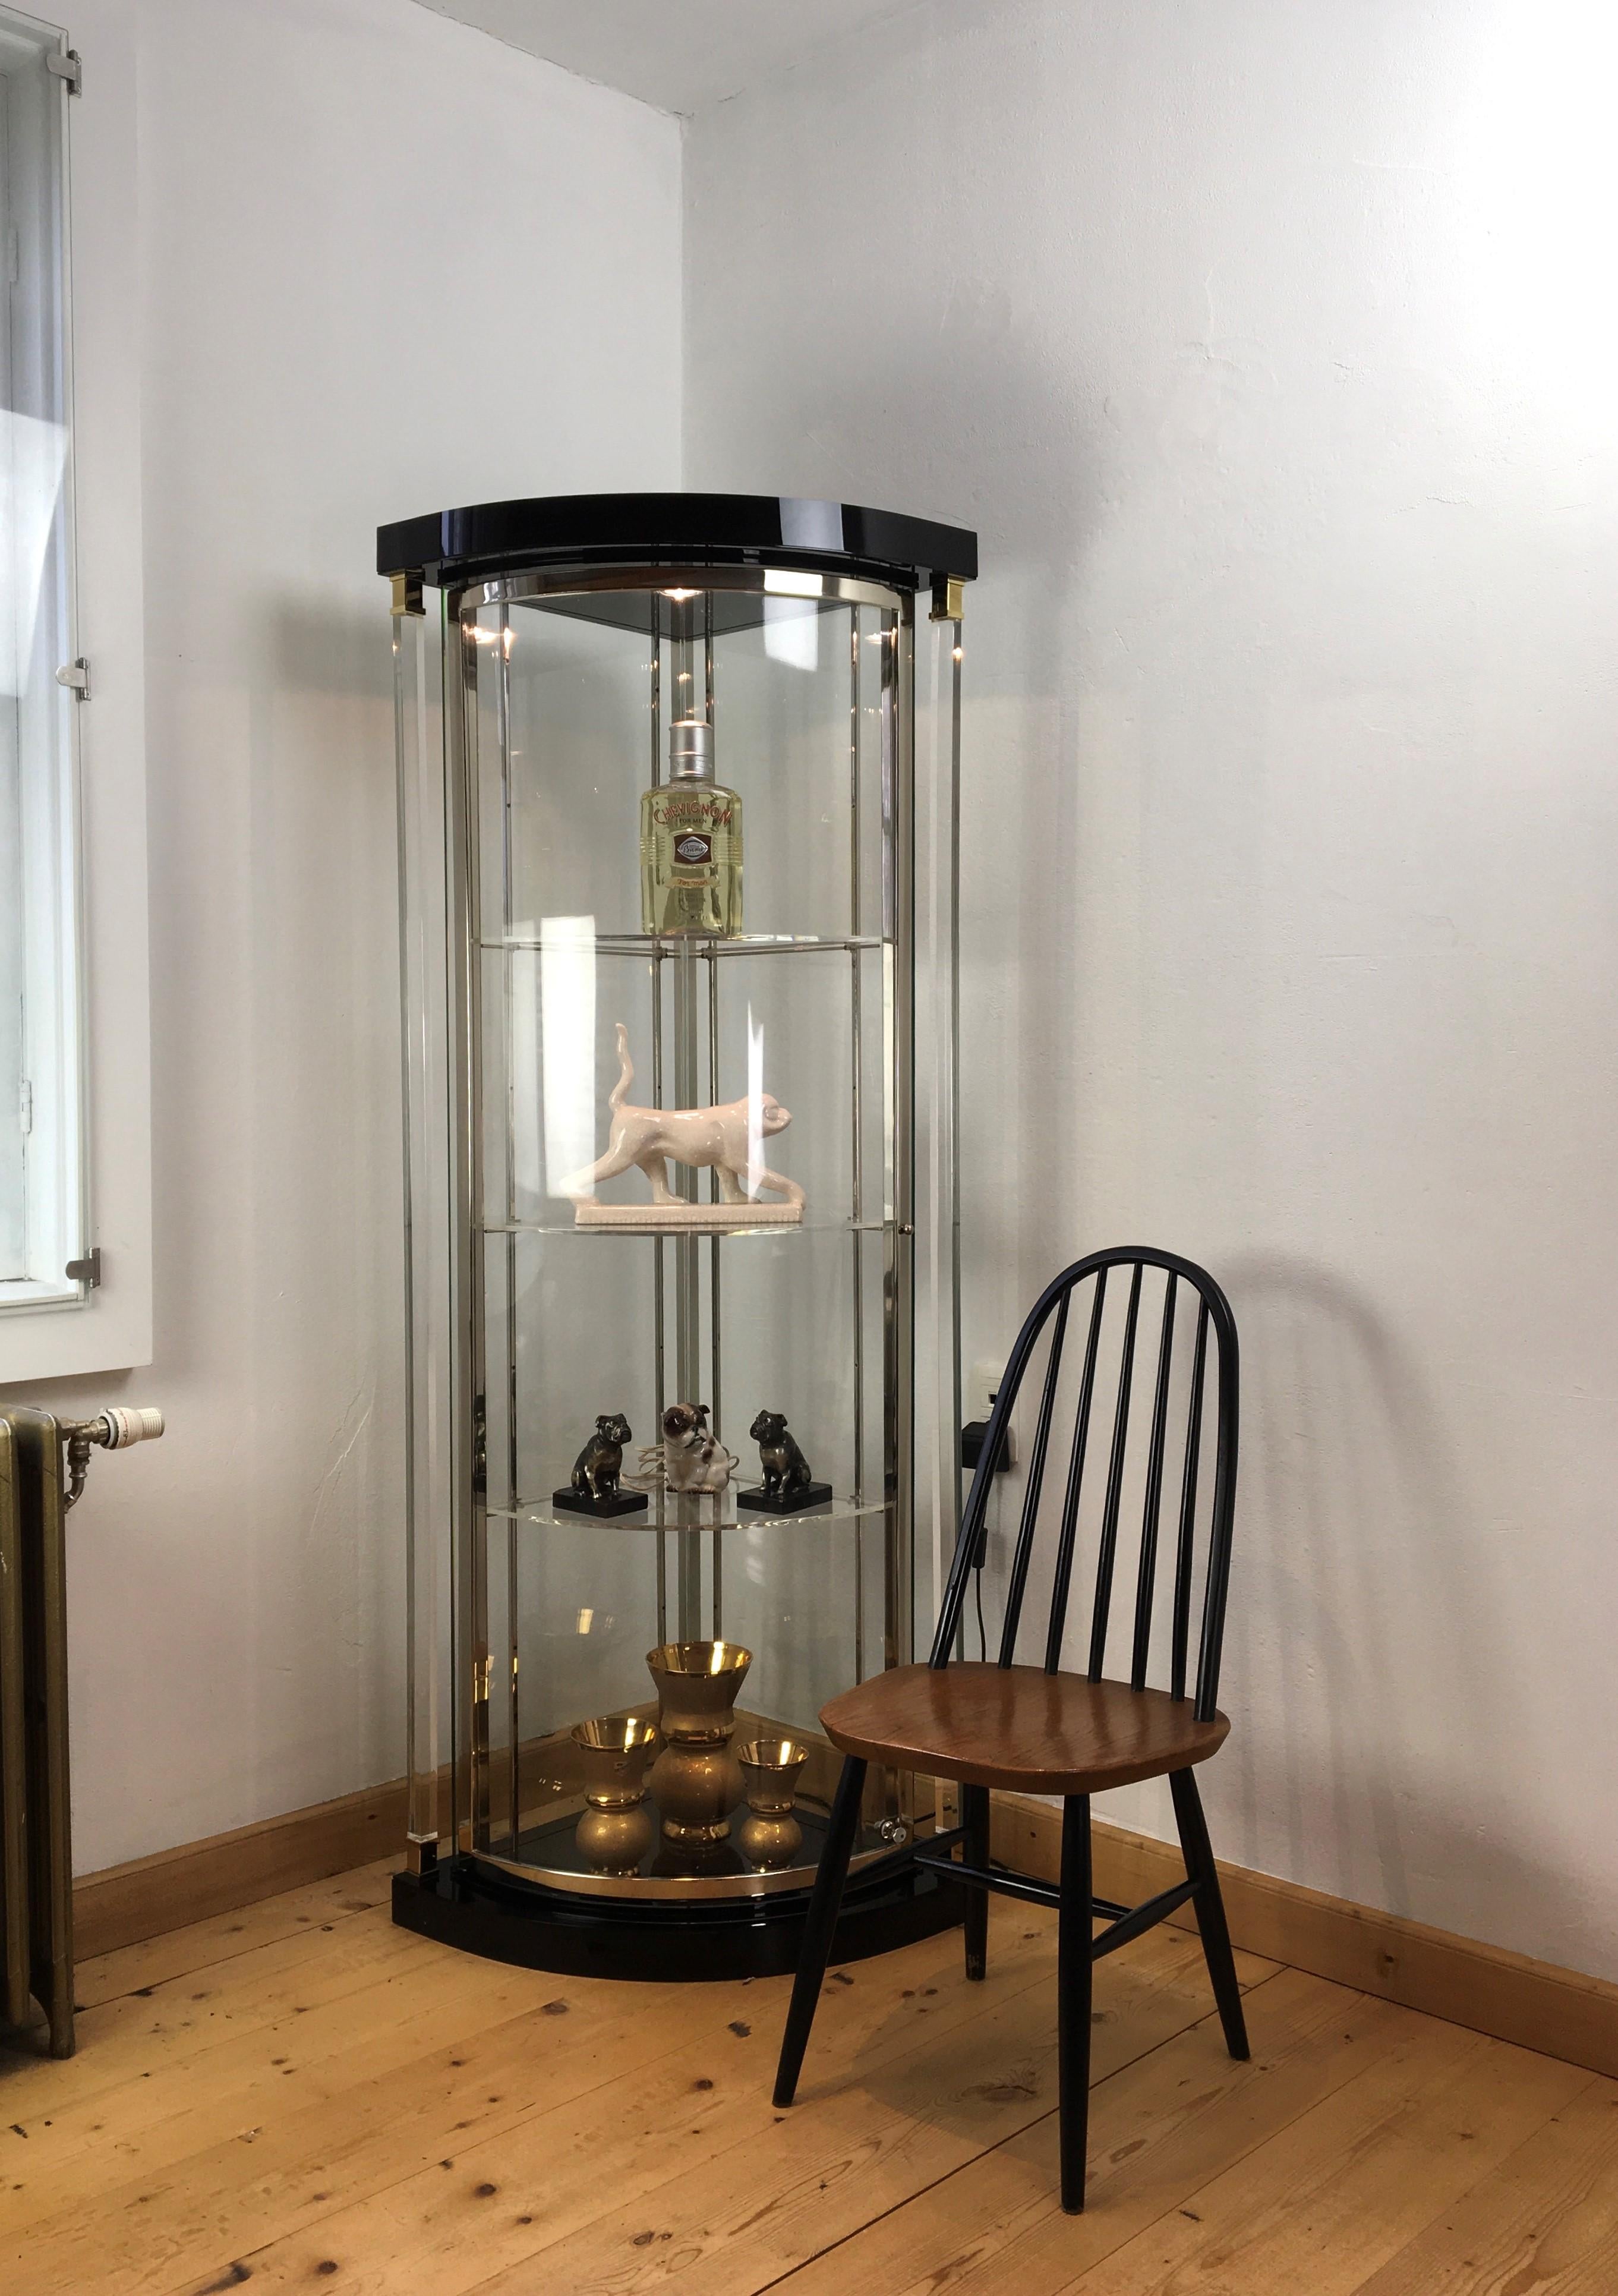 Corner vitrine by Belgo Chrome.
A spectacular Belgo Chrom showcase with glass at the sides, lucite door, lucite pillars left and right, lucite shelves inside and also lighting. Above and under the acrylic pilars 23KT gold plated finish ornaments.